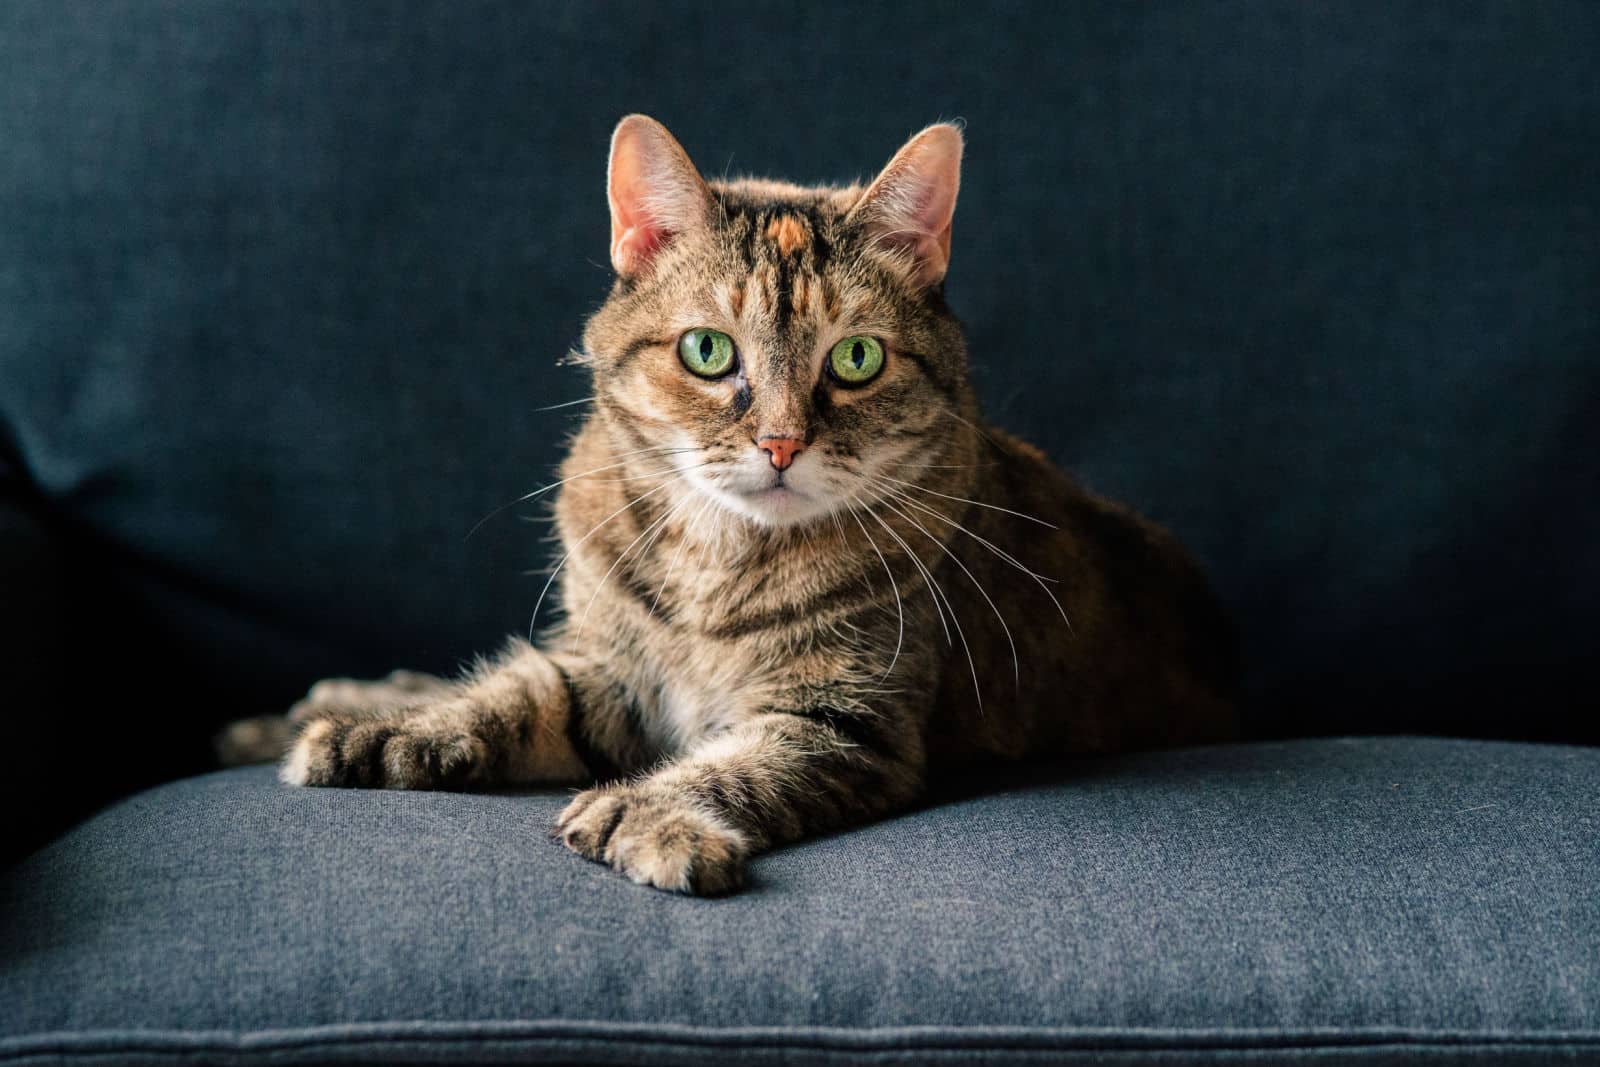 A polydactyl cat sits on a grey chair